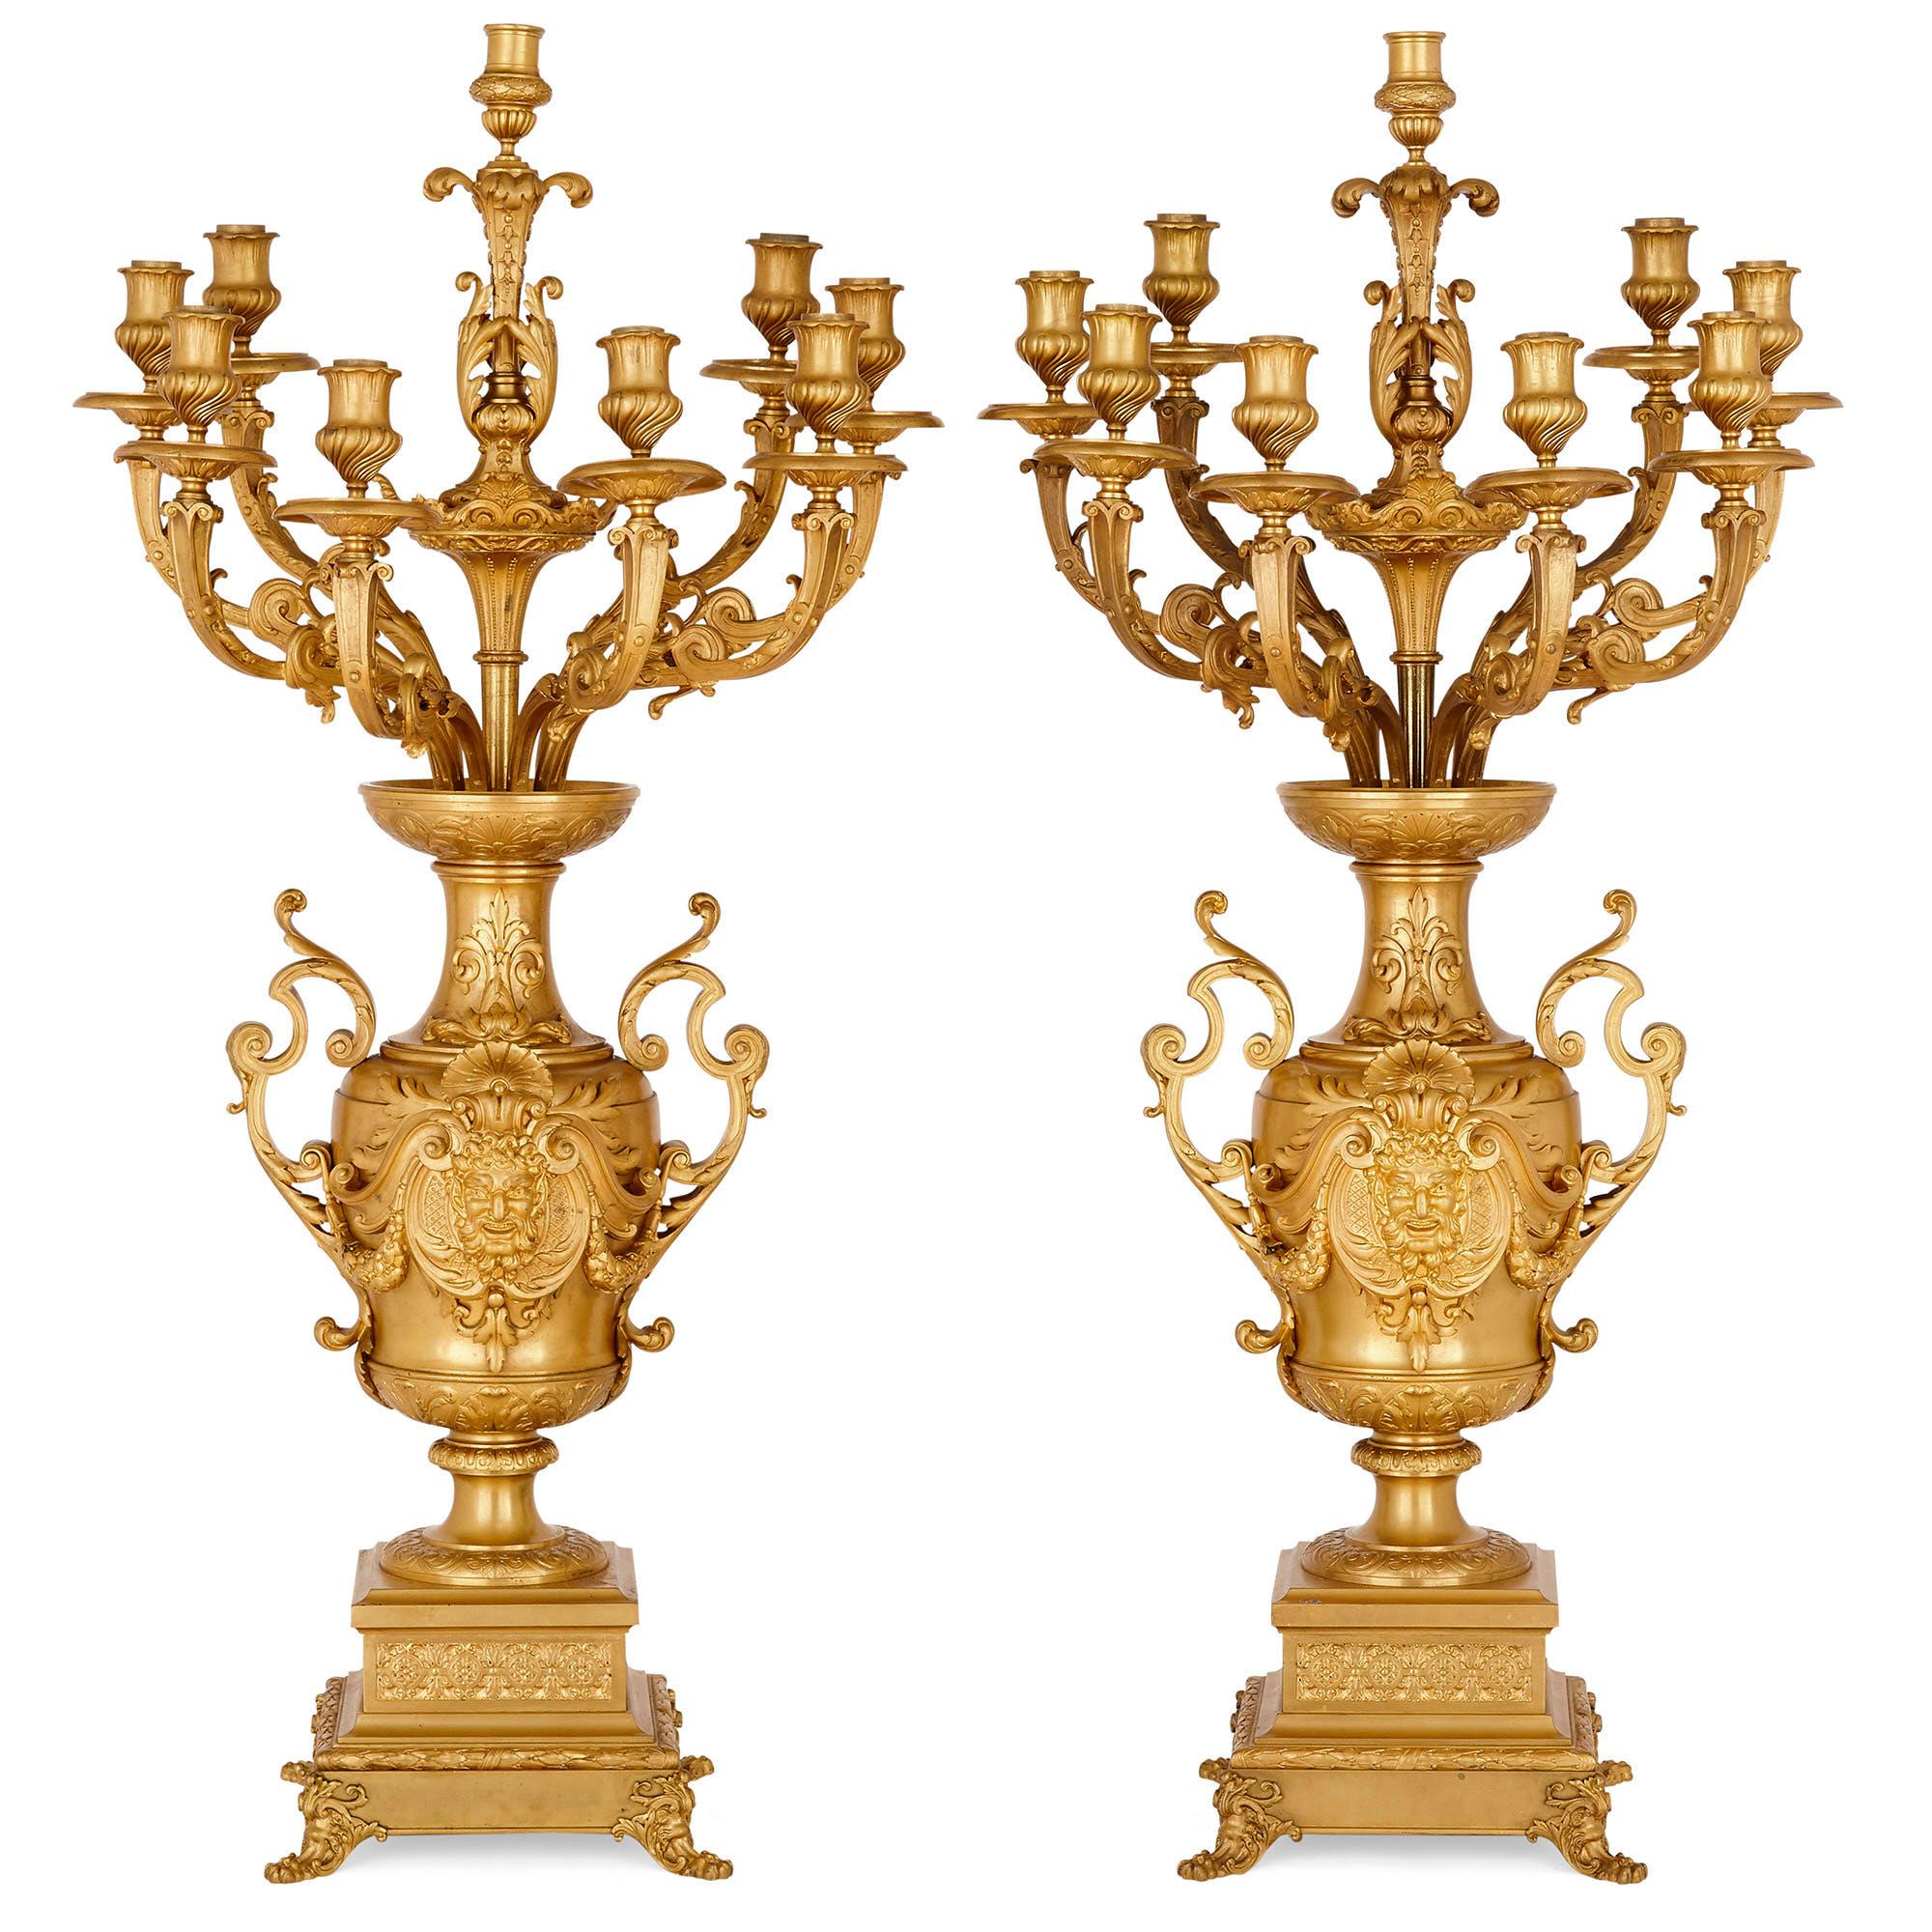 Pair of gilt bronze table candelabra by Ferdinand Barbedienne
French, late 19th century
Measures: Height 97cm, width 46cm, depth 35cm

These large and finely cast candelabra were made by the well respected bronzier Ferdinand Barbedienne and are